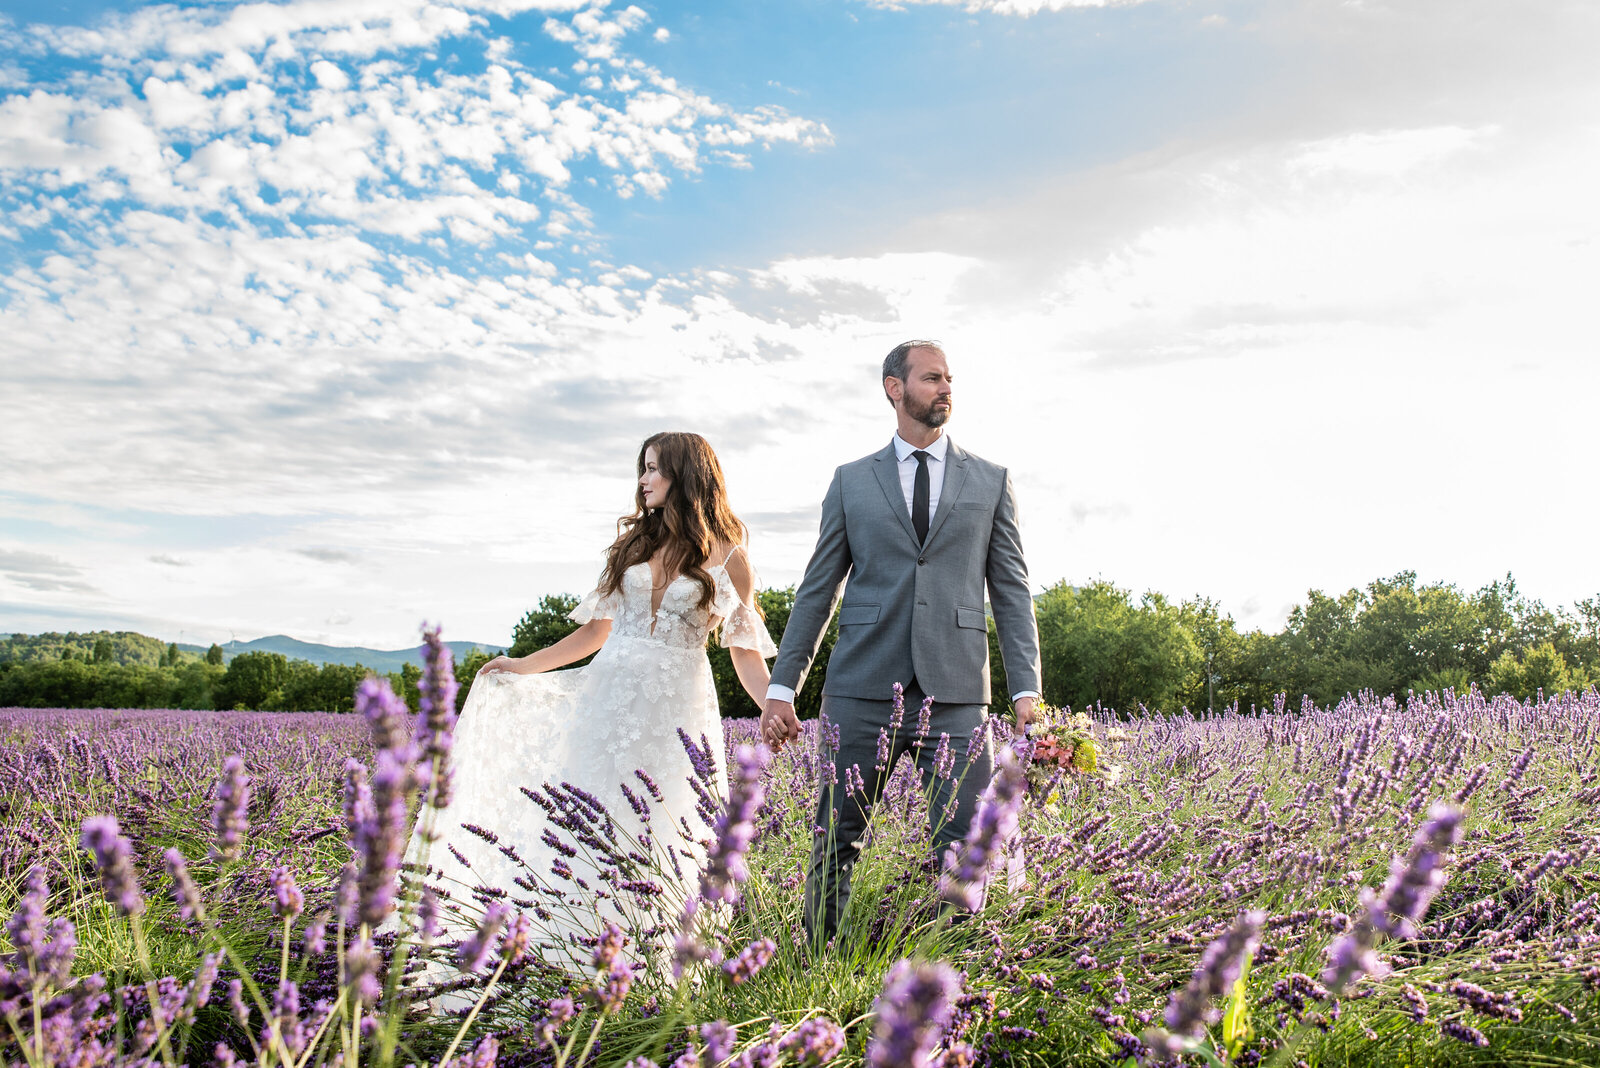 wedding photography lavender field bride and groom snuggling standing lavender in the foreground by Allison Burton Photography